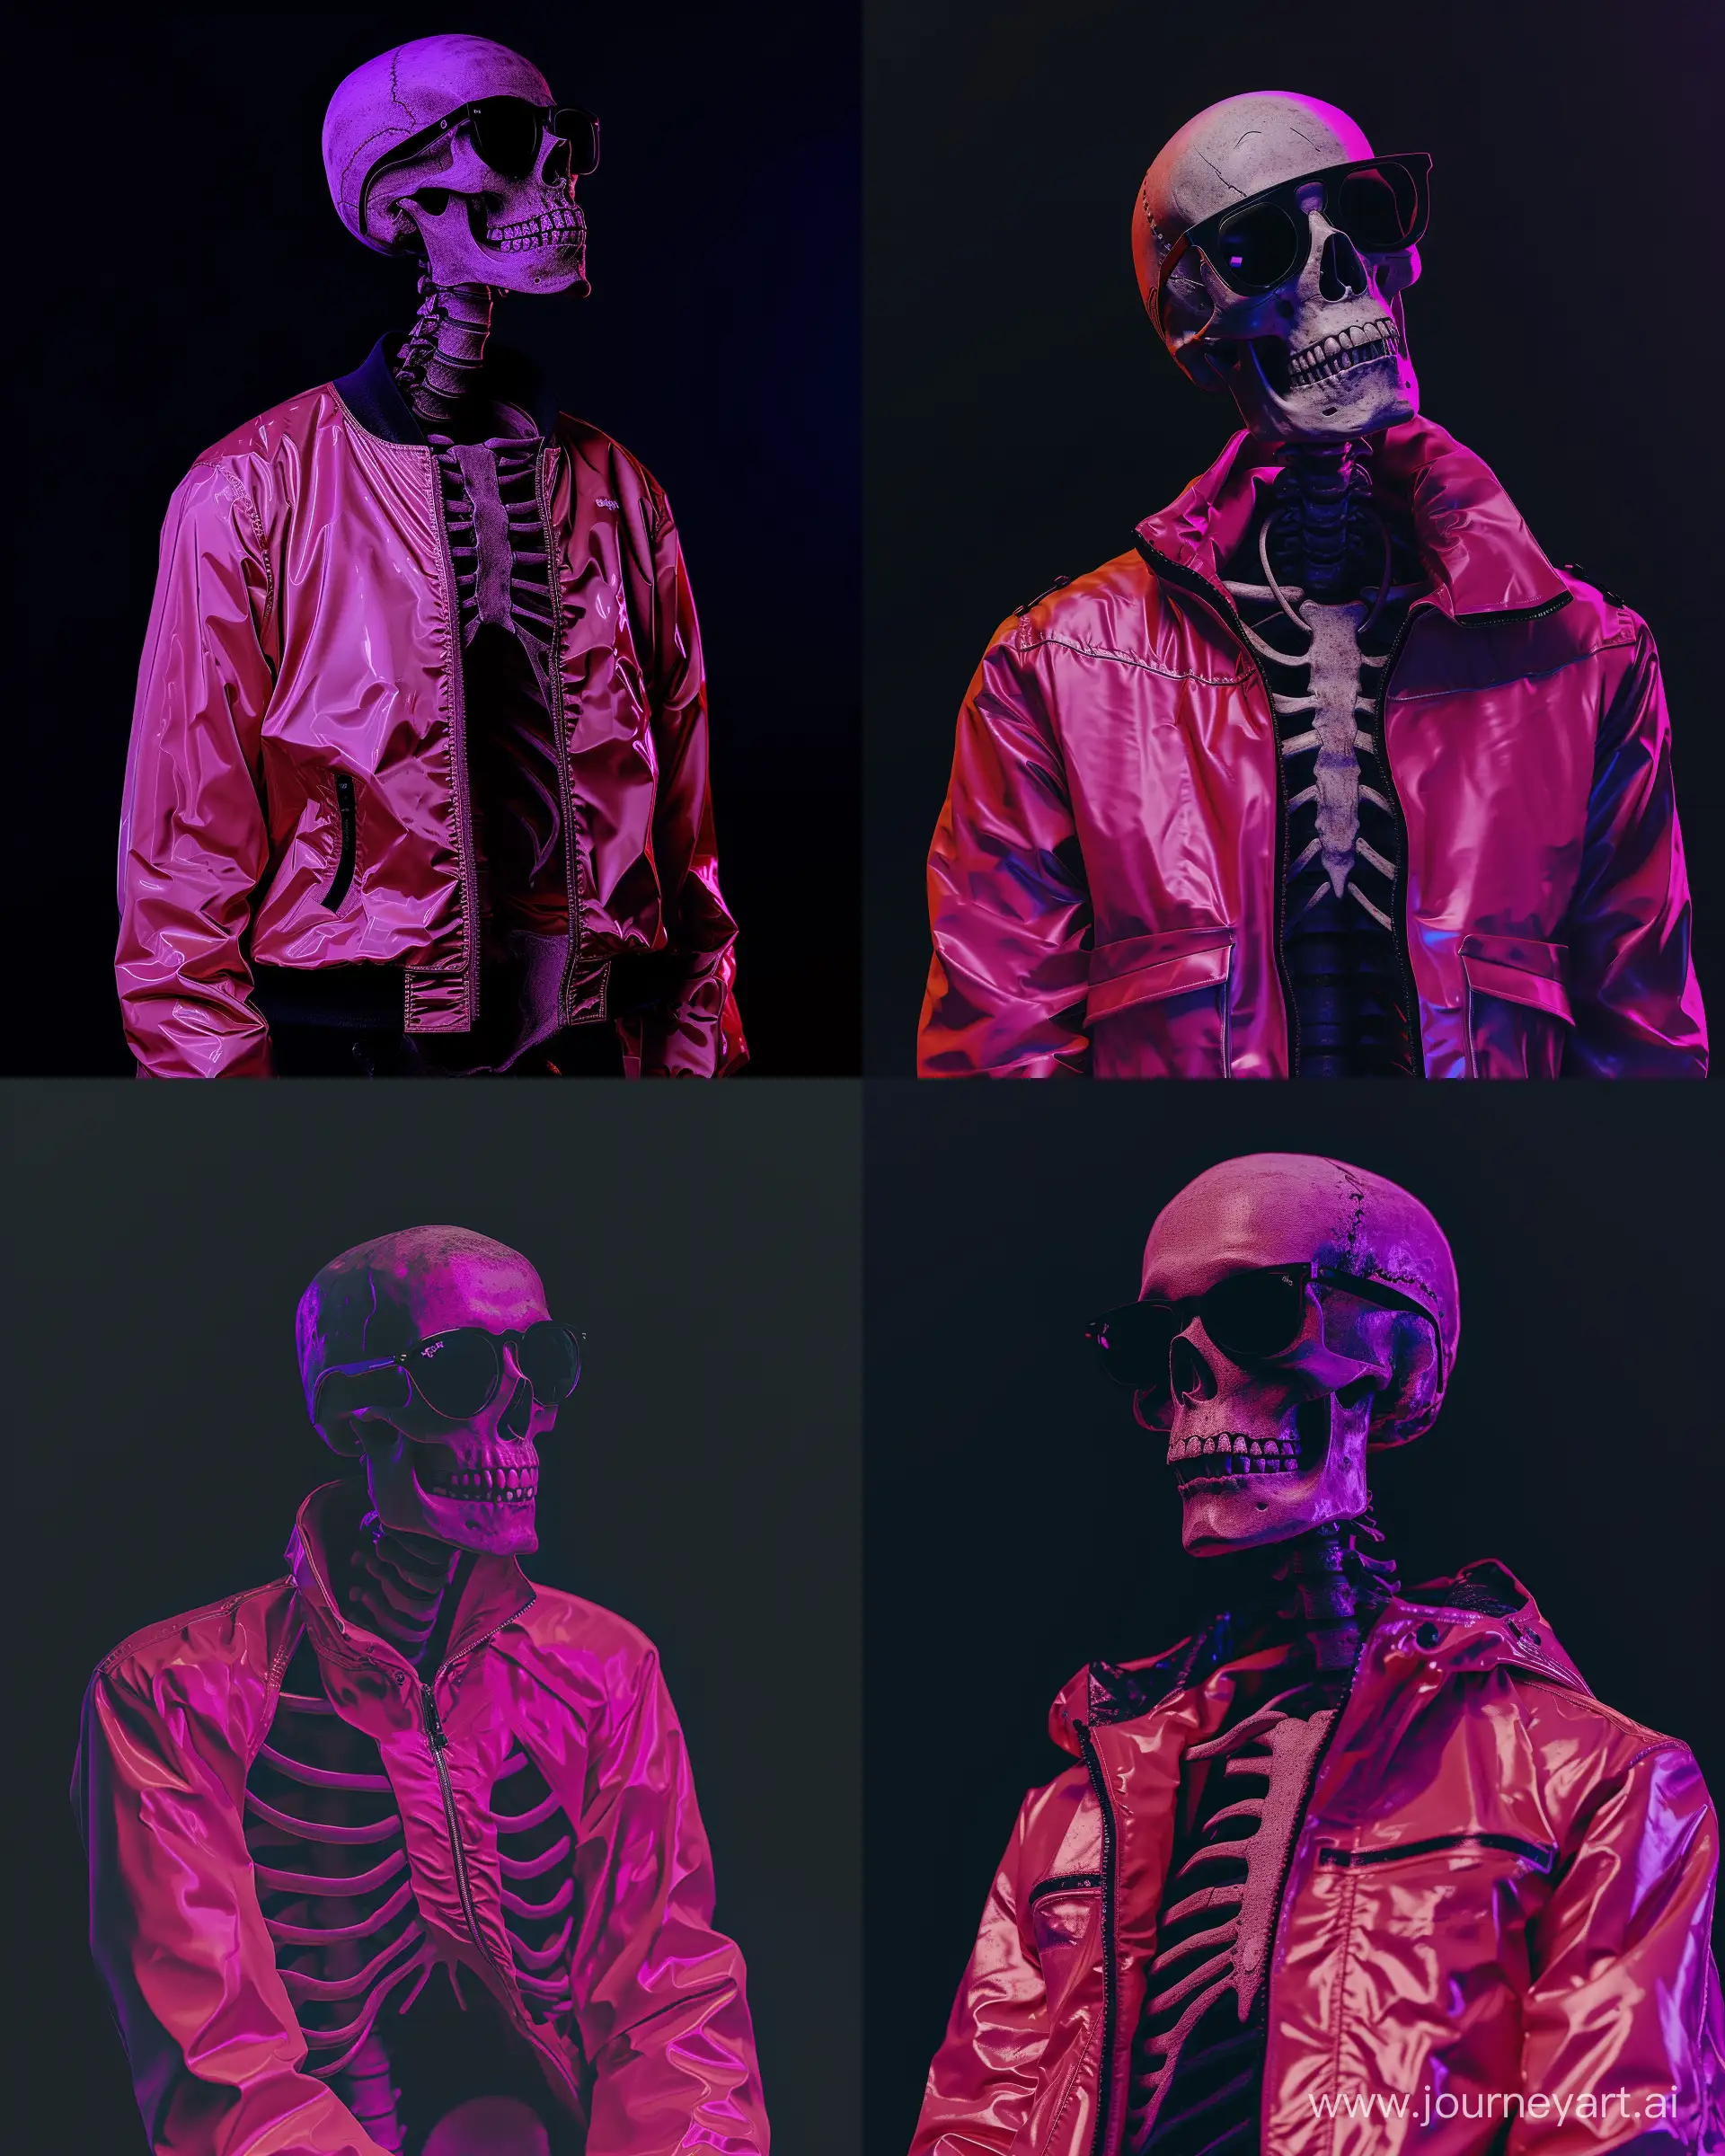 Mystical-Skeleton-Pink-Jacket-and-Neon-Shades-in-Enigmatic-Realism